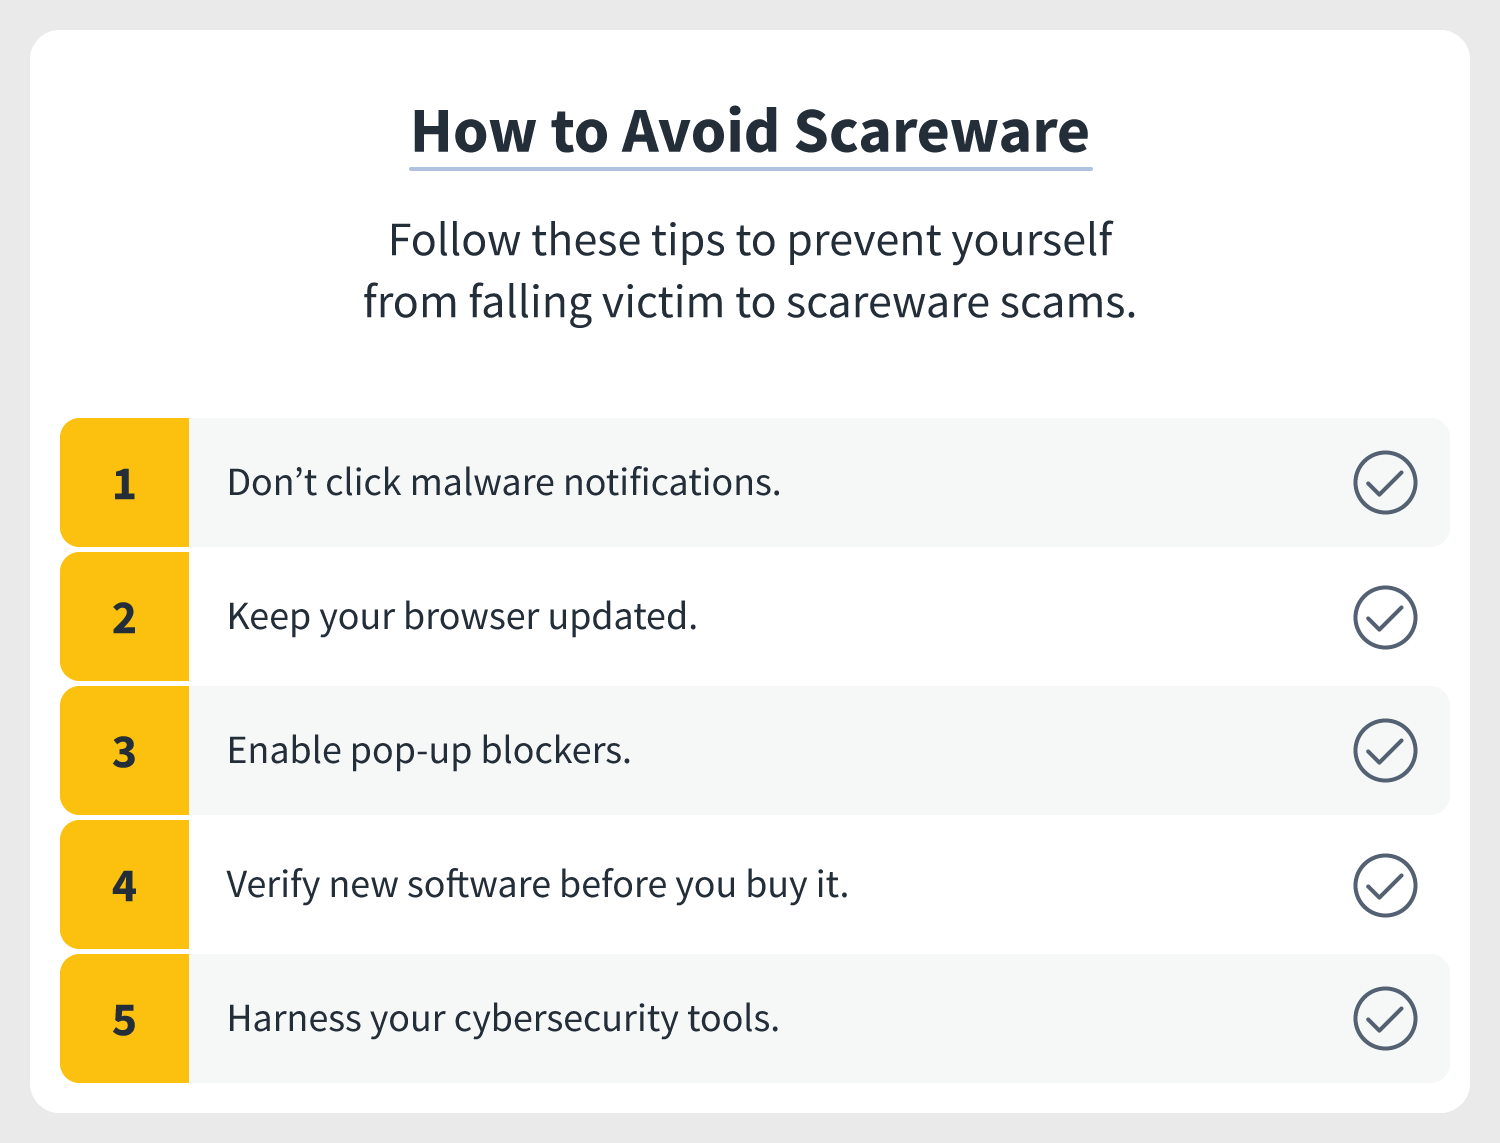 a checklist of 5 common tips to prevent yourself from falling victim to scareware scams